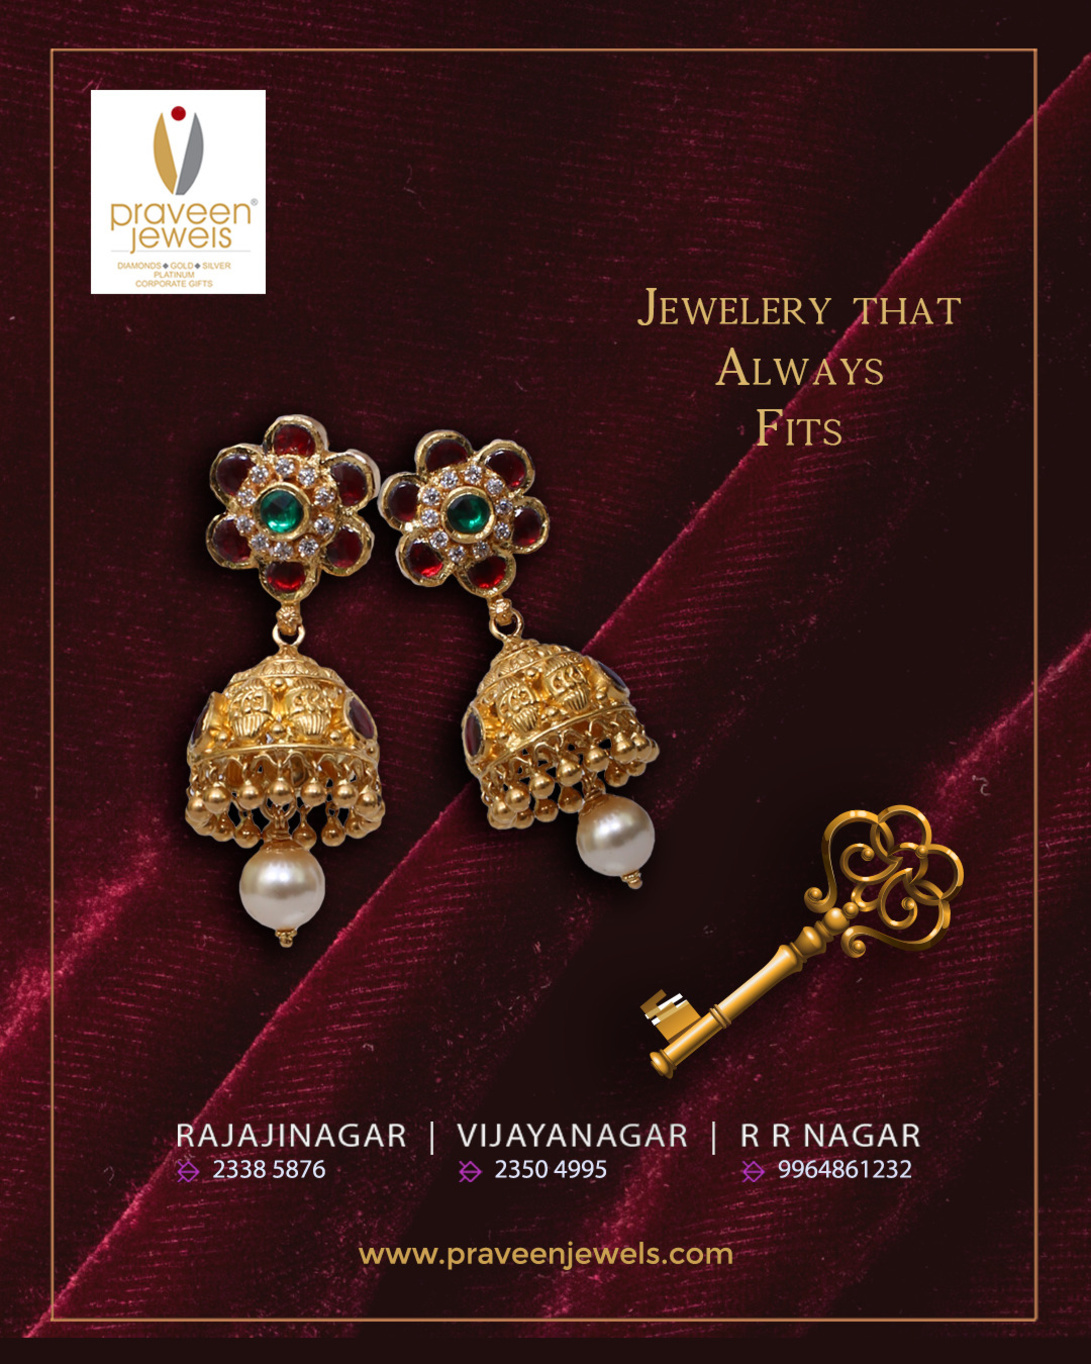 Praveen jewels review